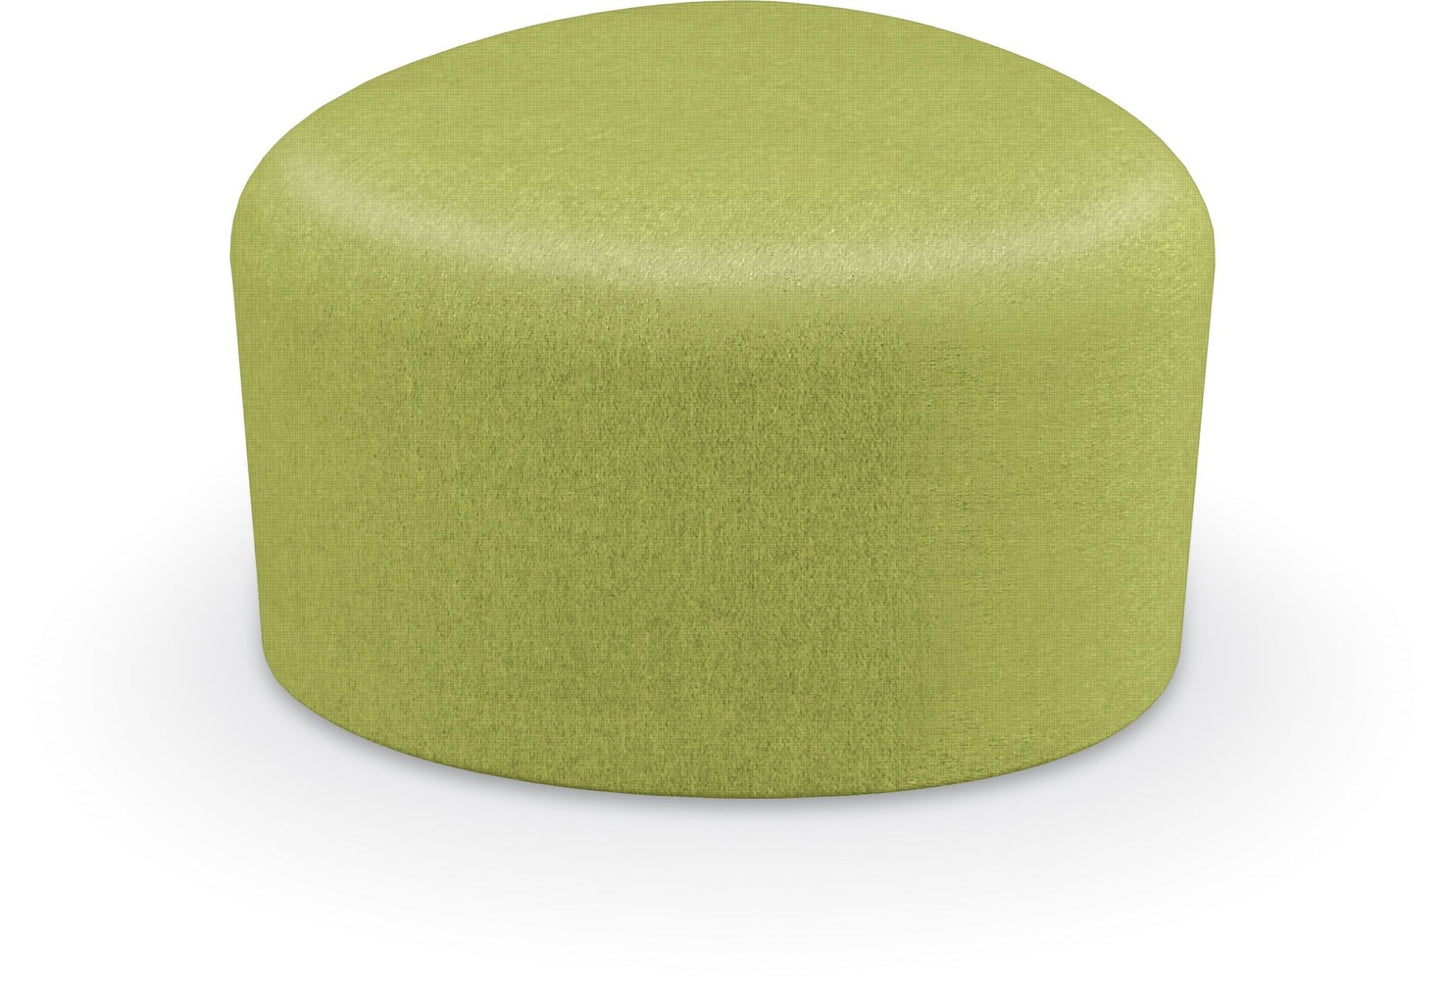 Mooreco Akt Soft Seating Lounge Small Ottoman - Grade 02 Fabric and Powder Coated Sled Legs - SchoolOutlet